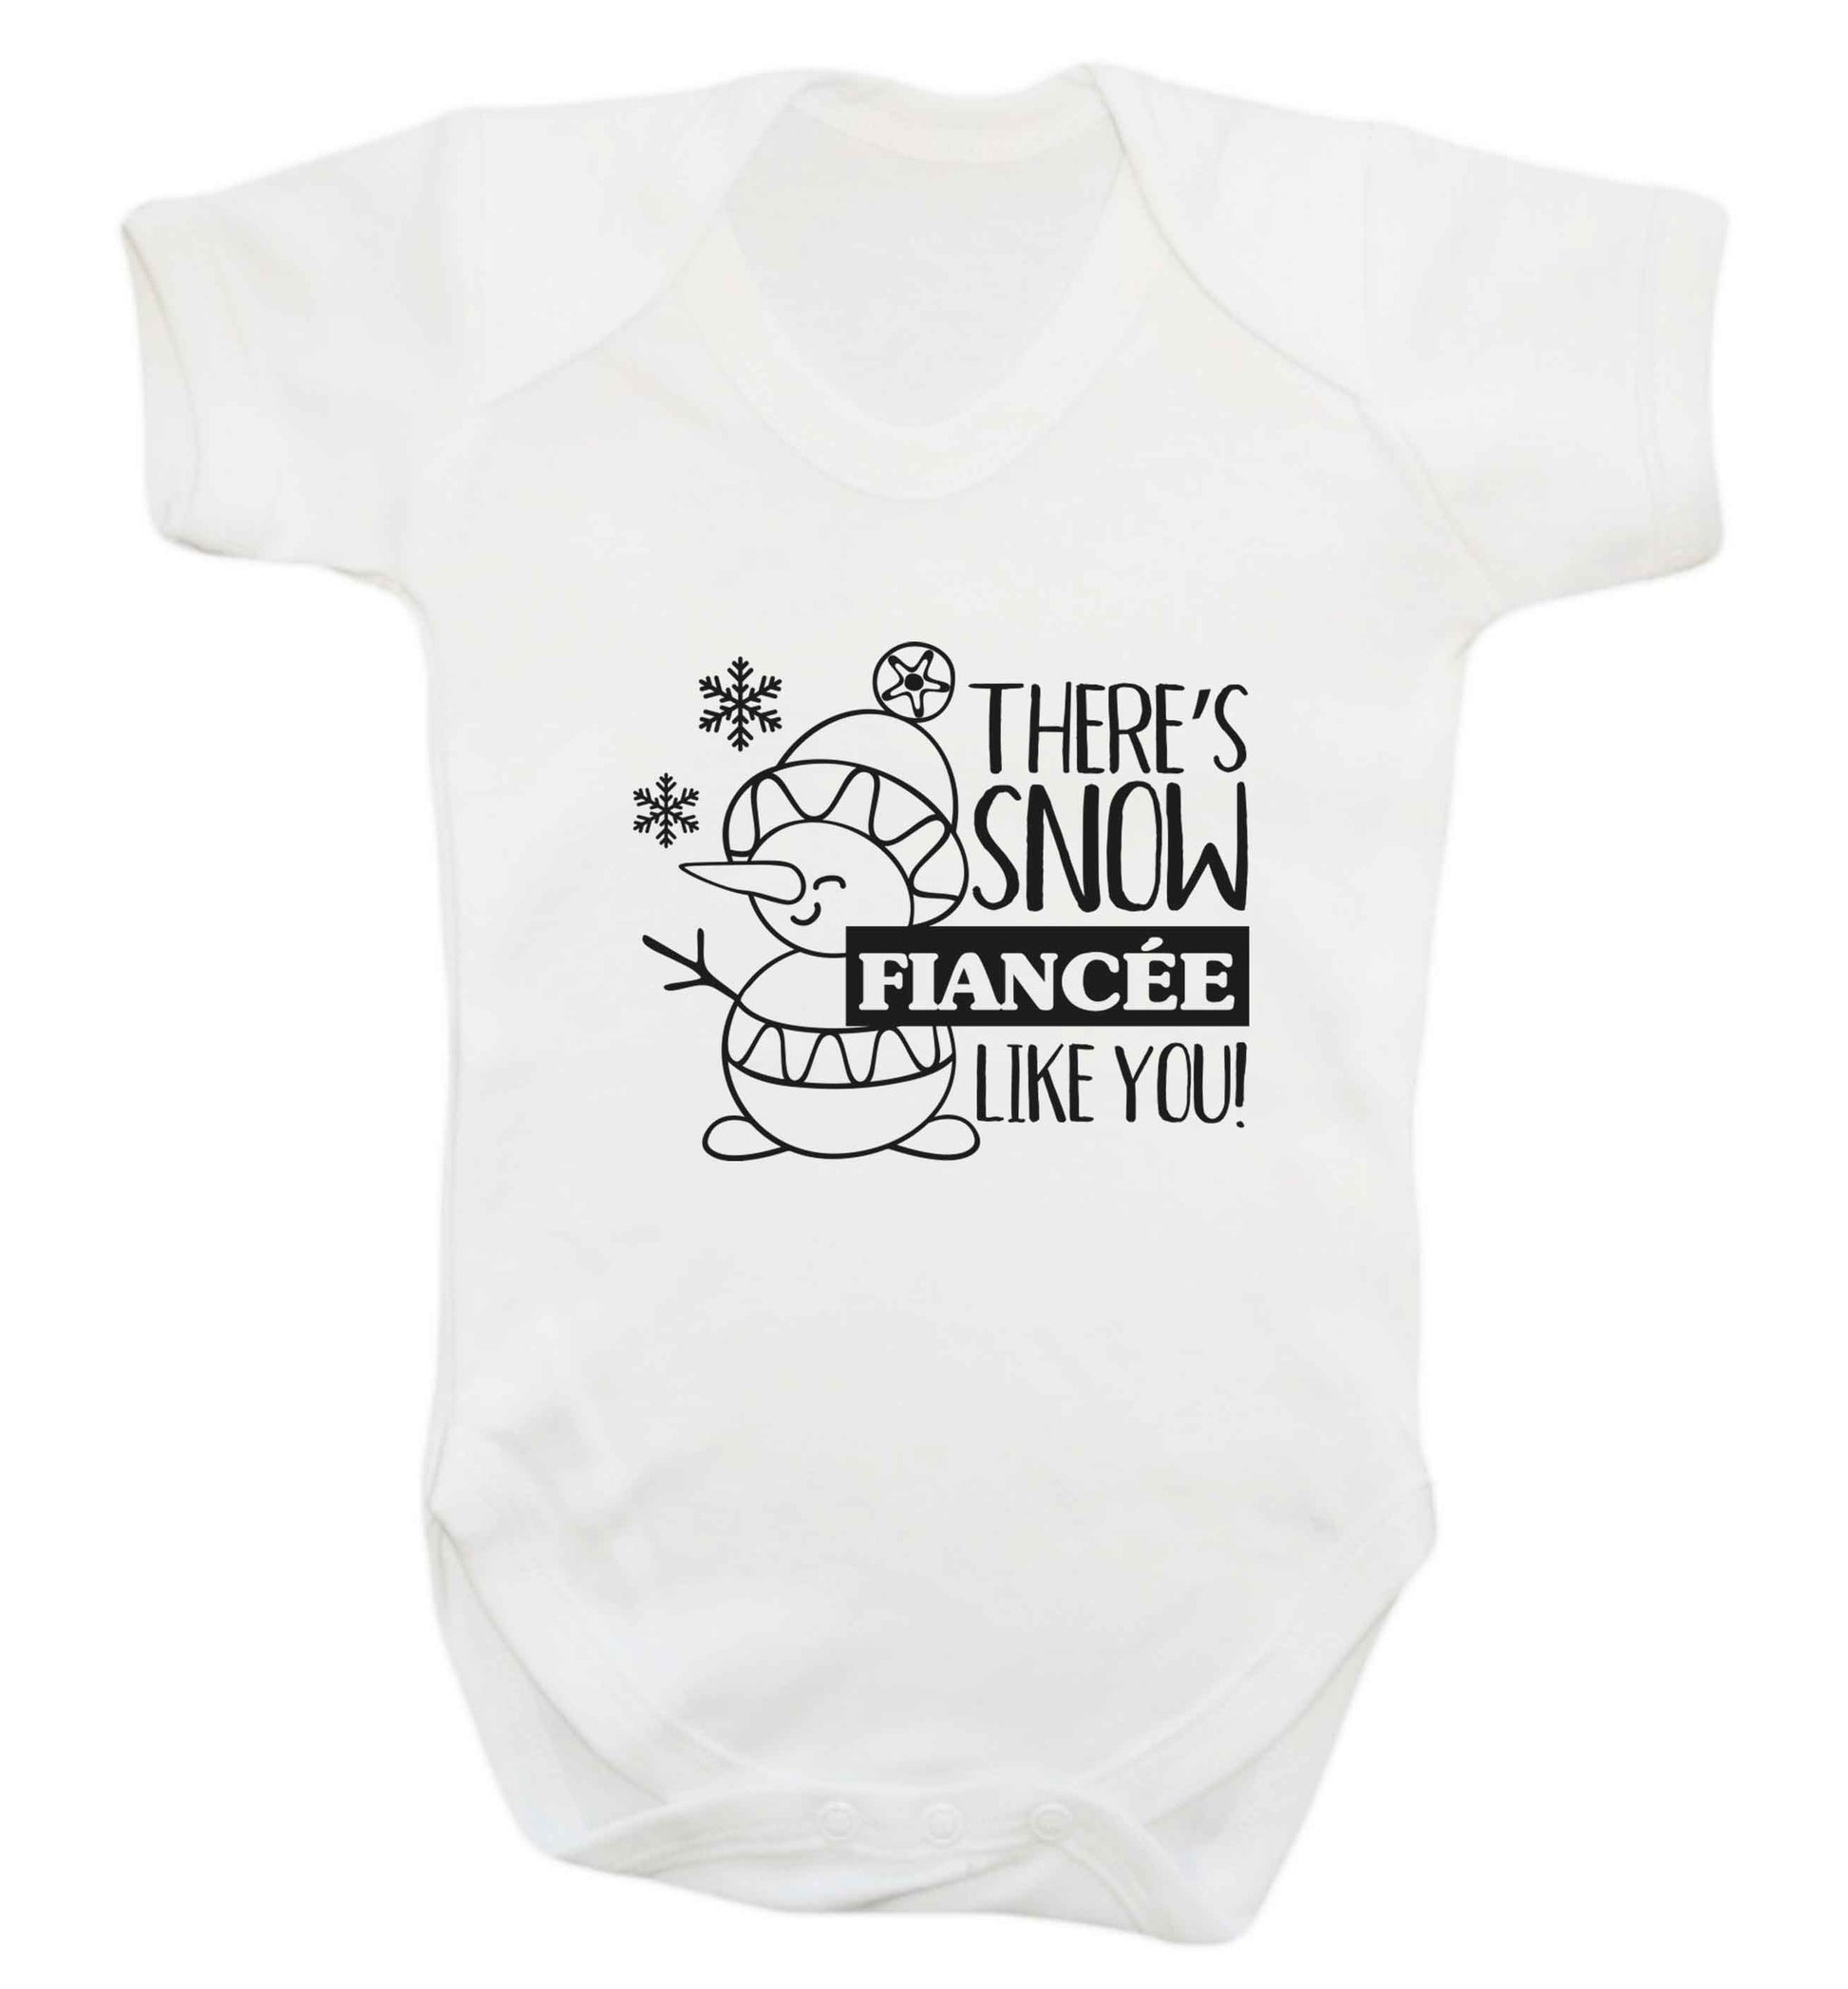 There's snow fiancee like you baby vest white 18-24 months